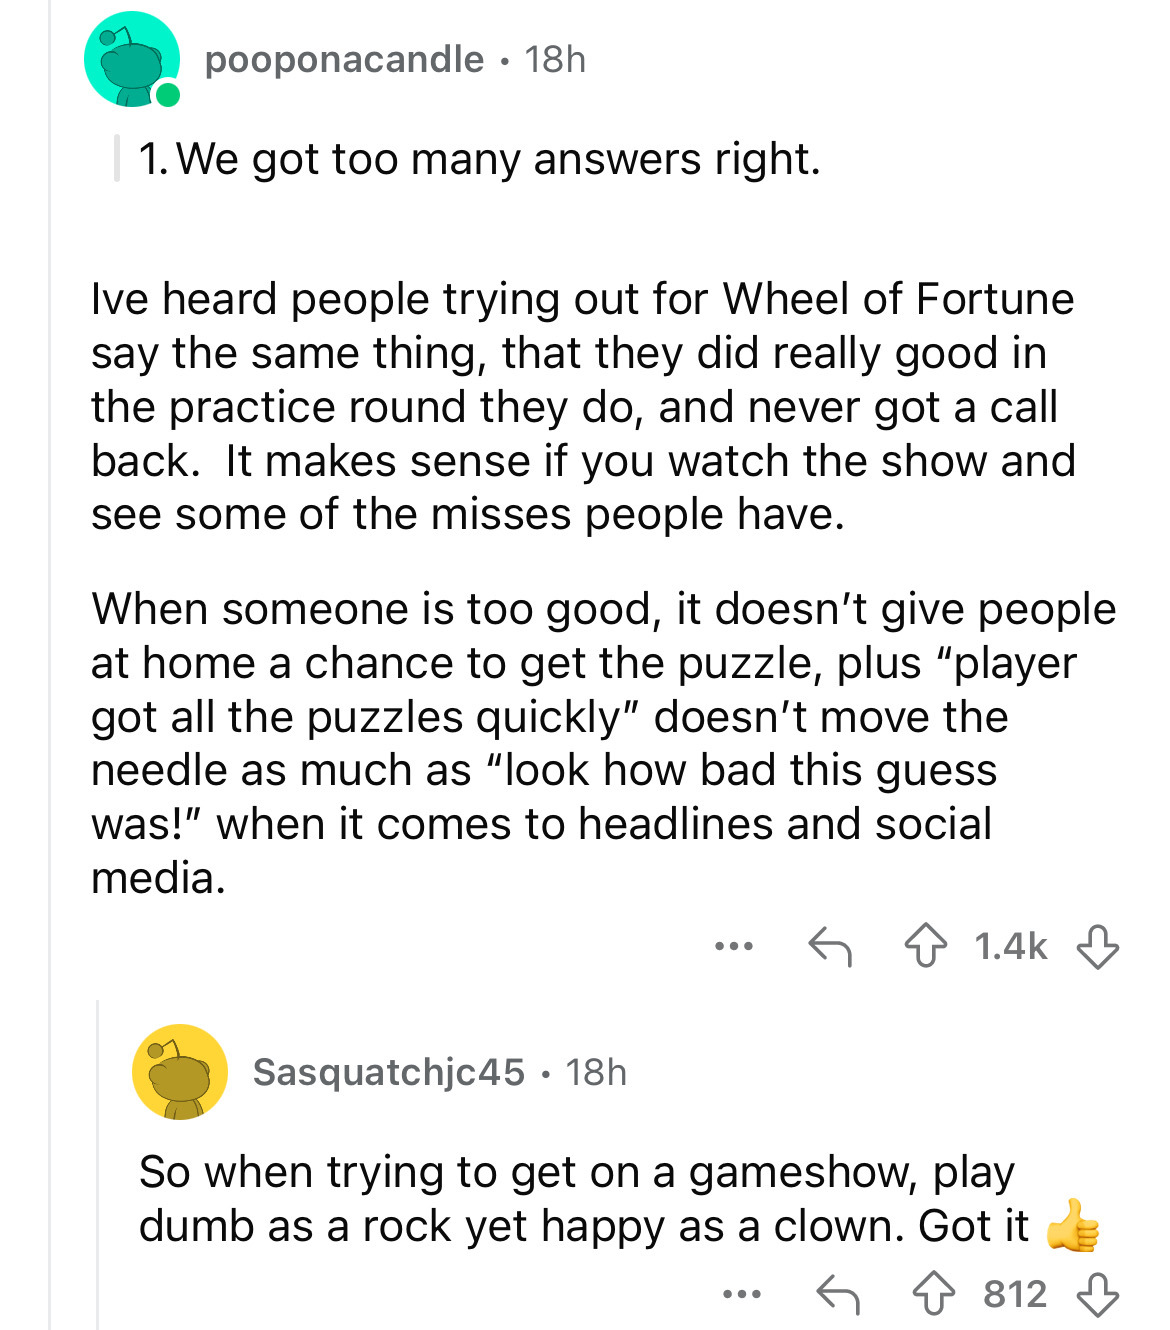 document - pooponacandle 18h 1. We got too many answers right. Ive heard people trying out for Wheel of Fortune say the same thing, that they did really good in the practice round they do, and never got a call back. It makes sense if you watch the show an